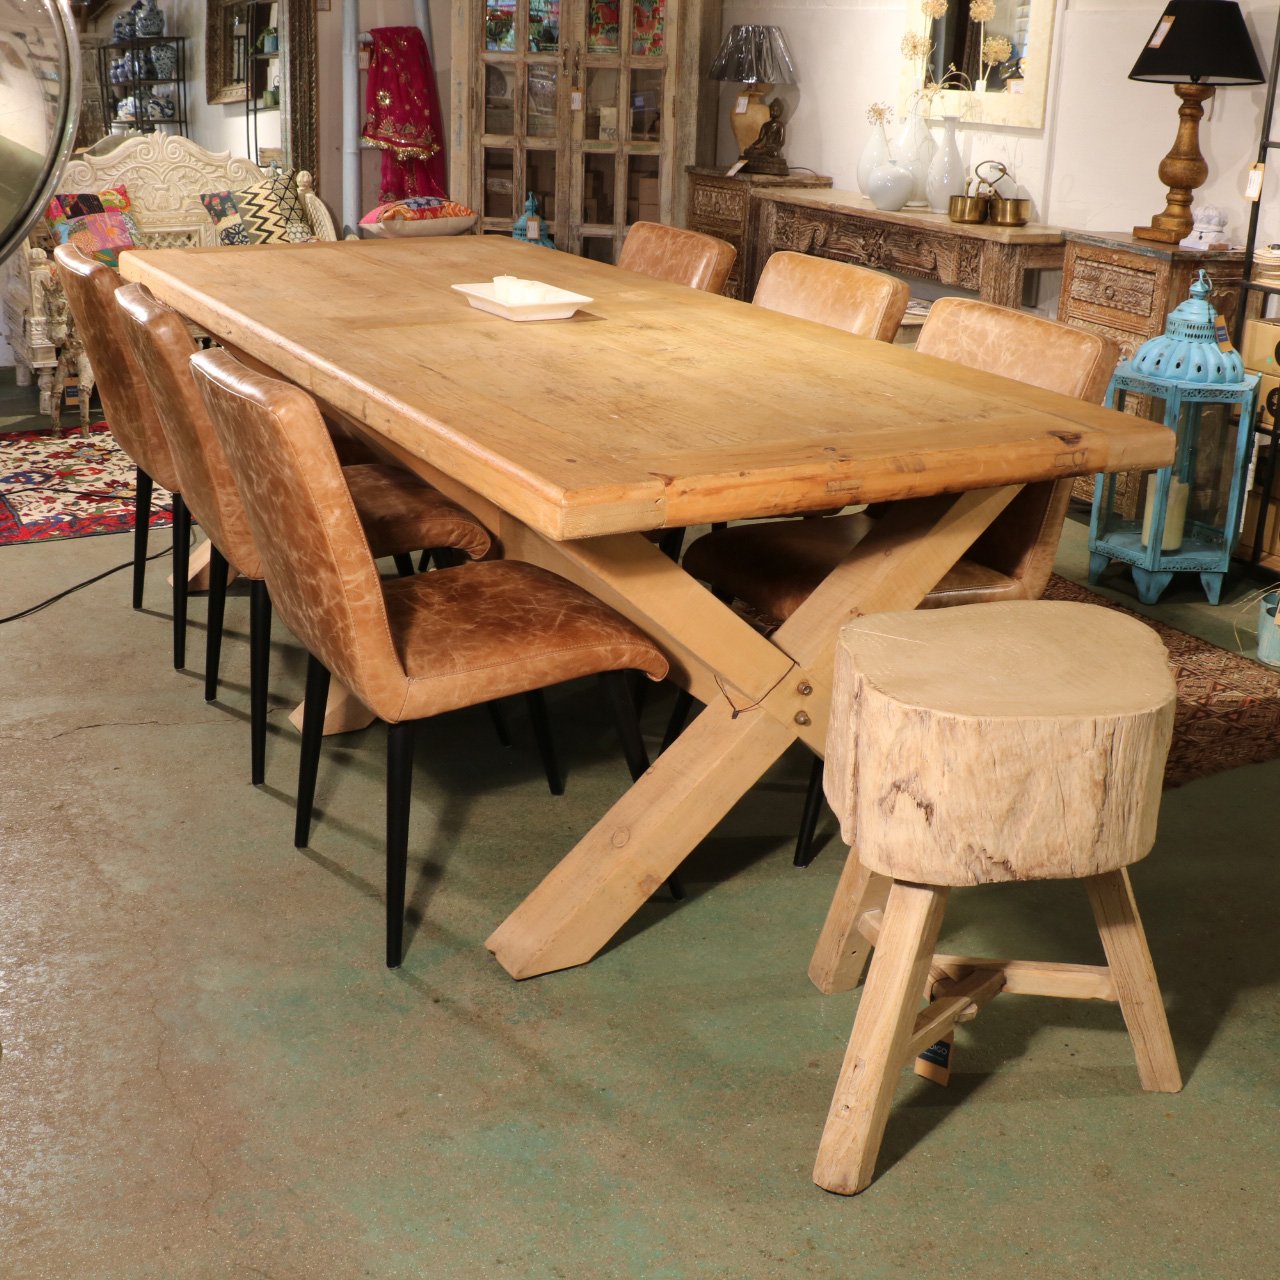 8 - 10 Seater Dining Table Made From Old Pine - X Leg Design | Indigo Oriental Antiques